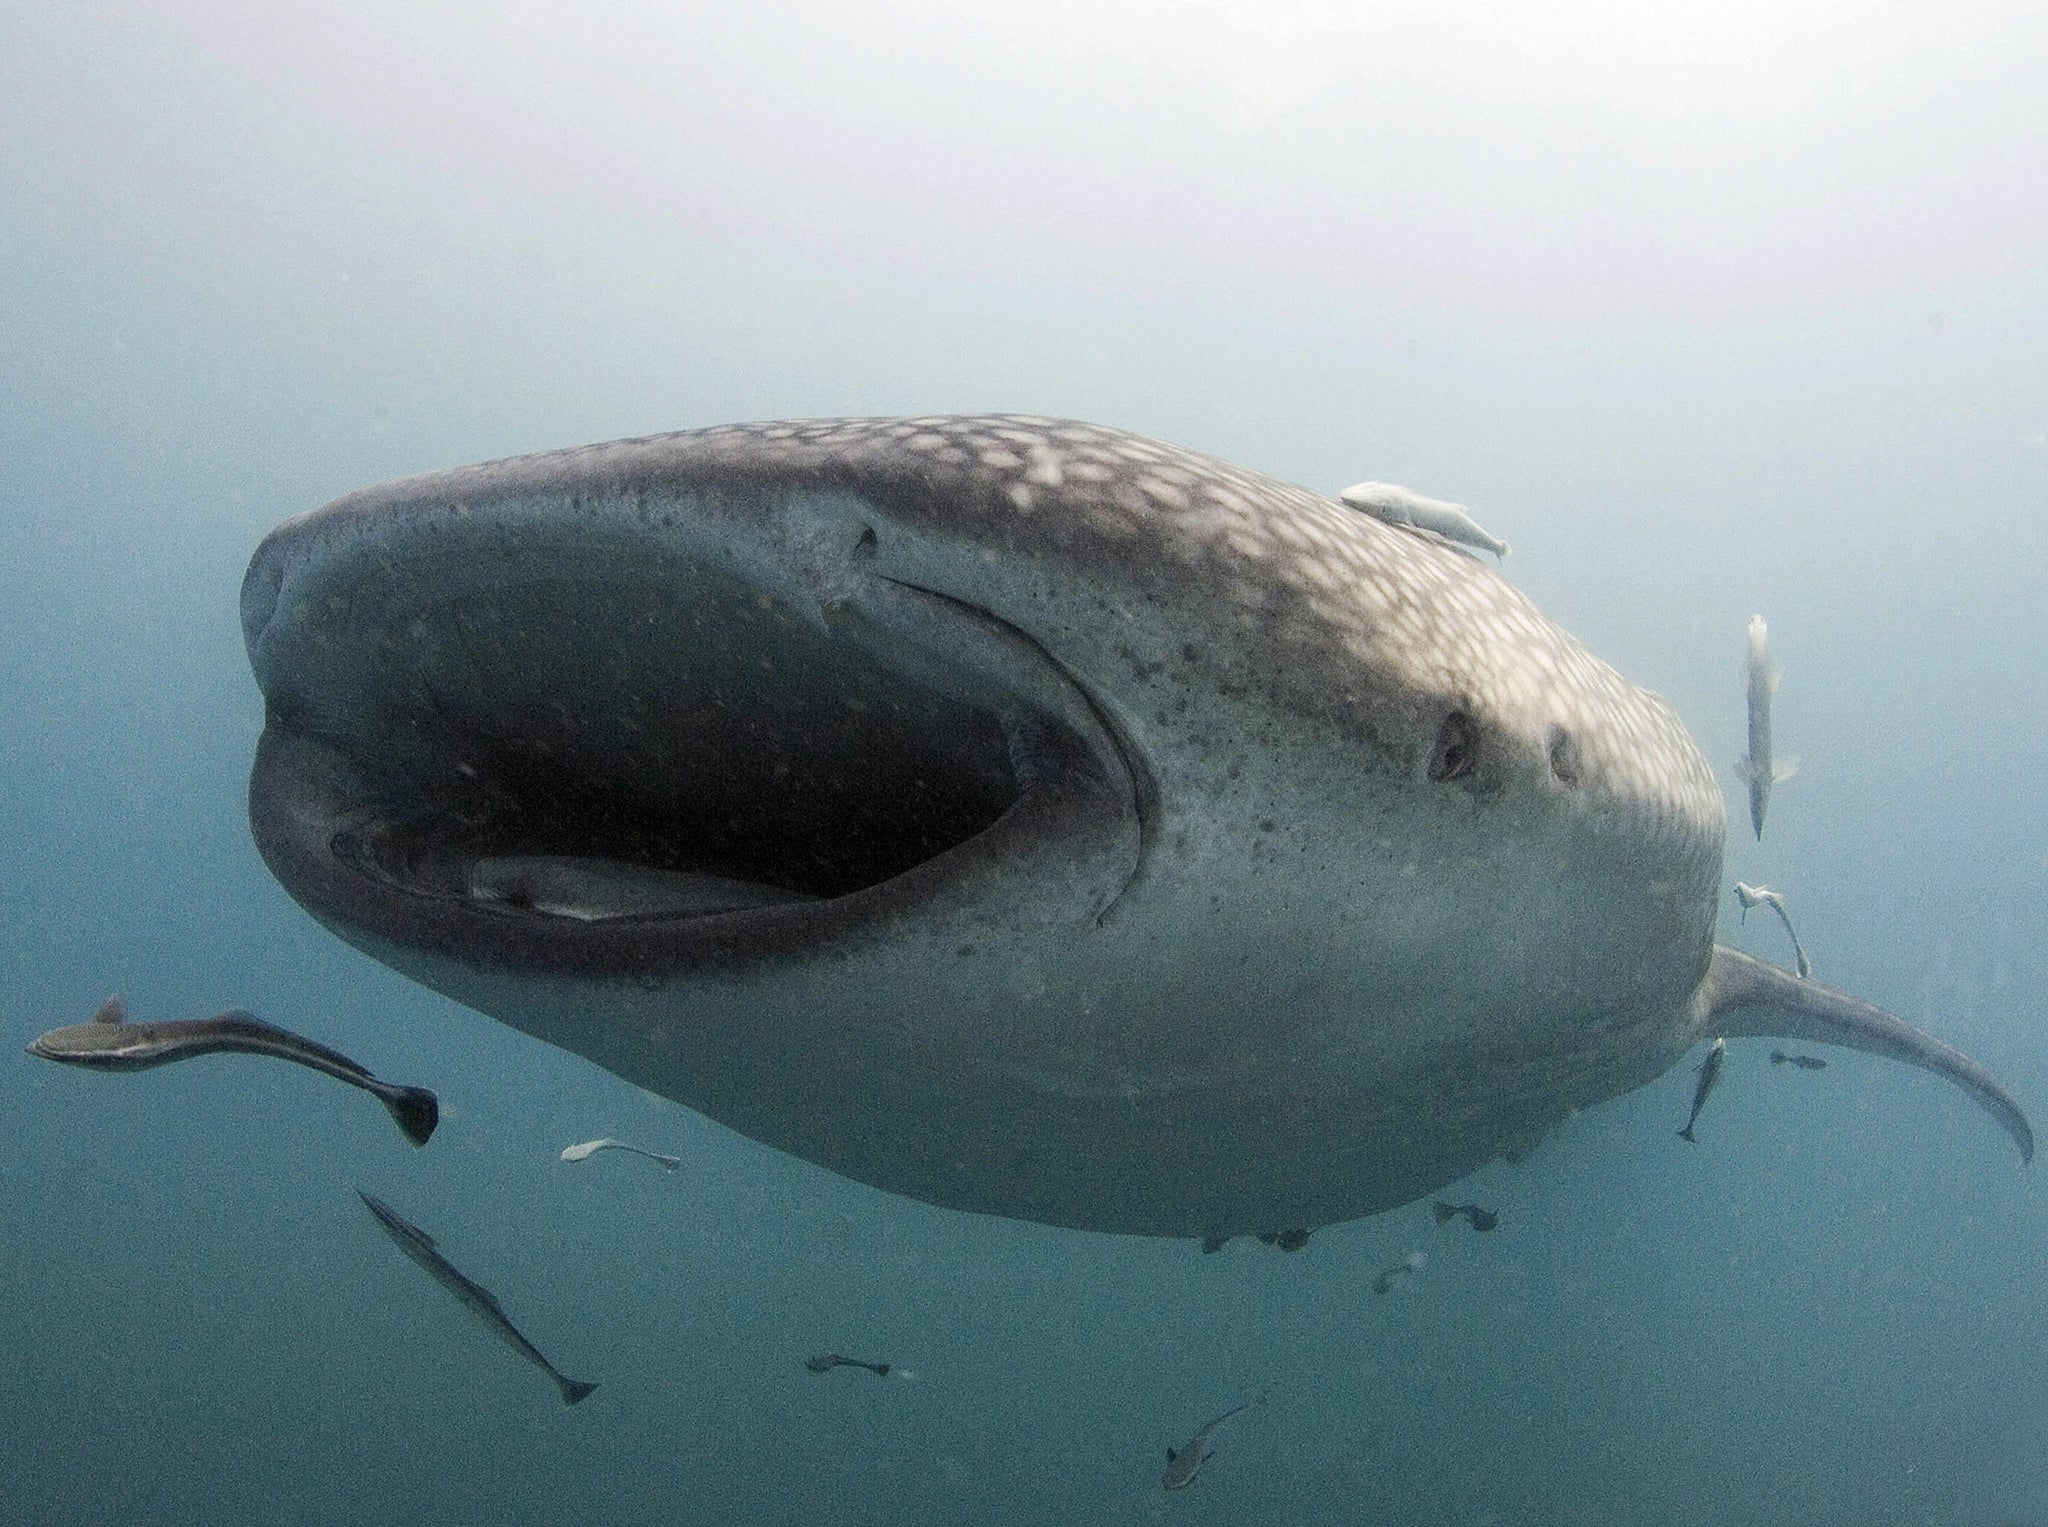 A whale shark, nearly six meters (20 feet) long, swims near the surface of the plankton-rich water (Getty Images)